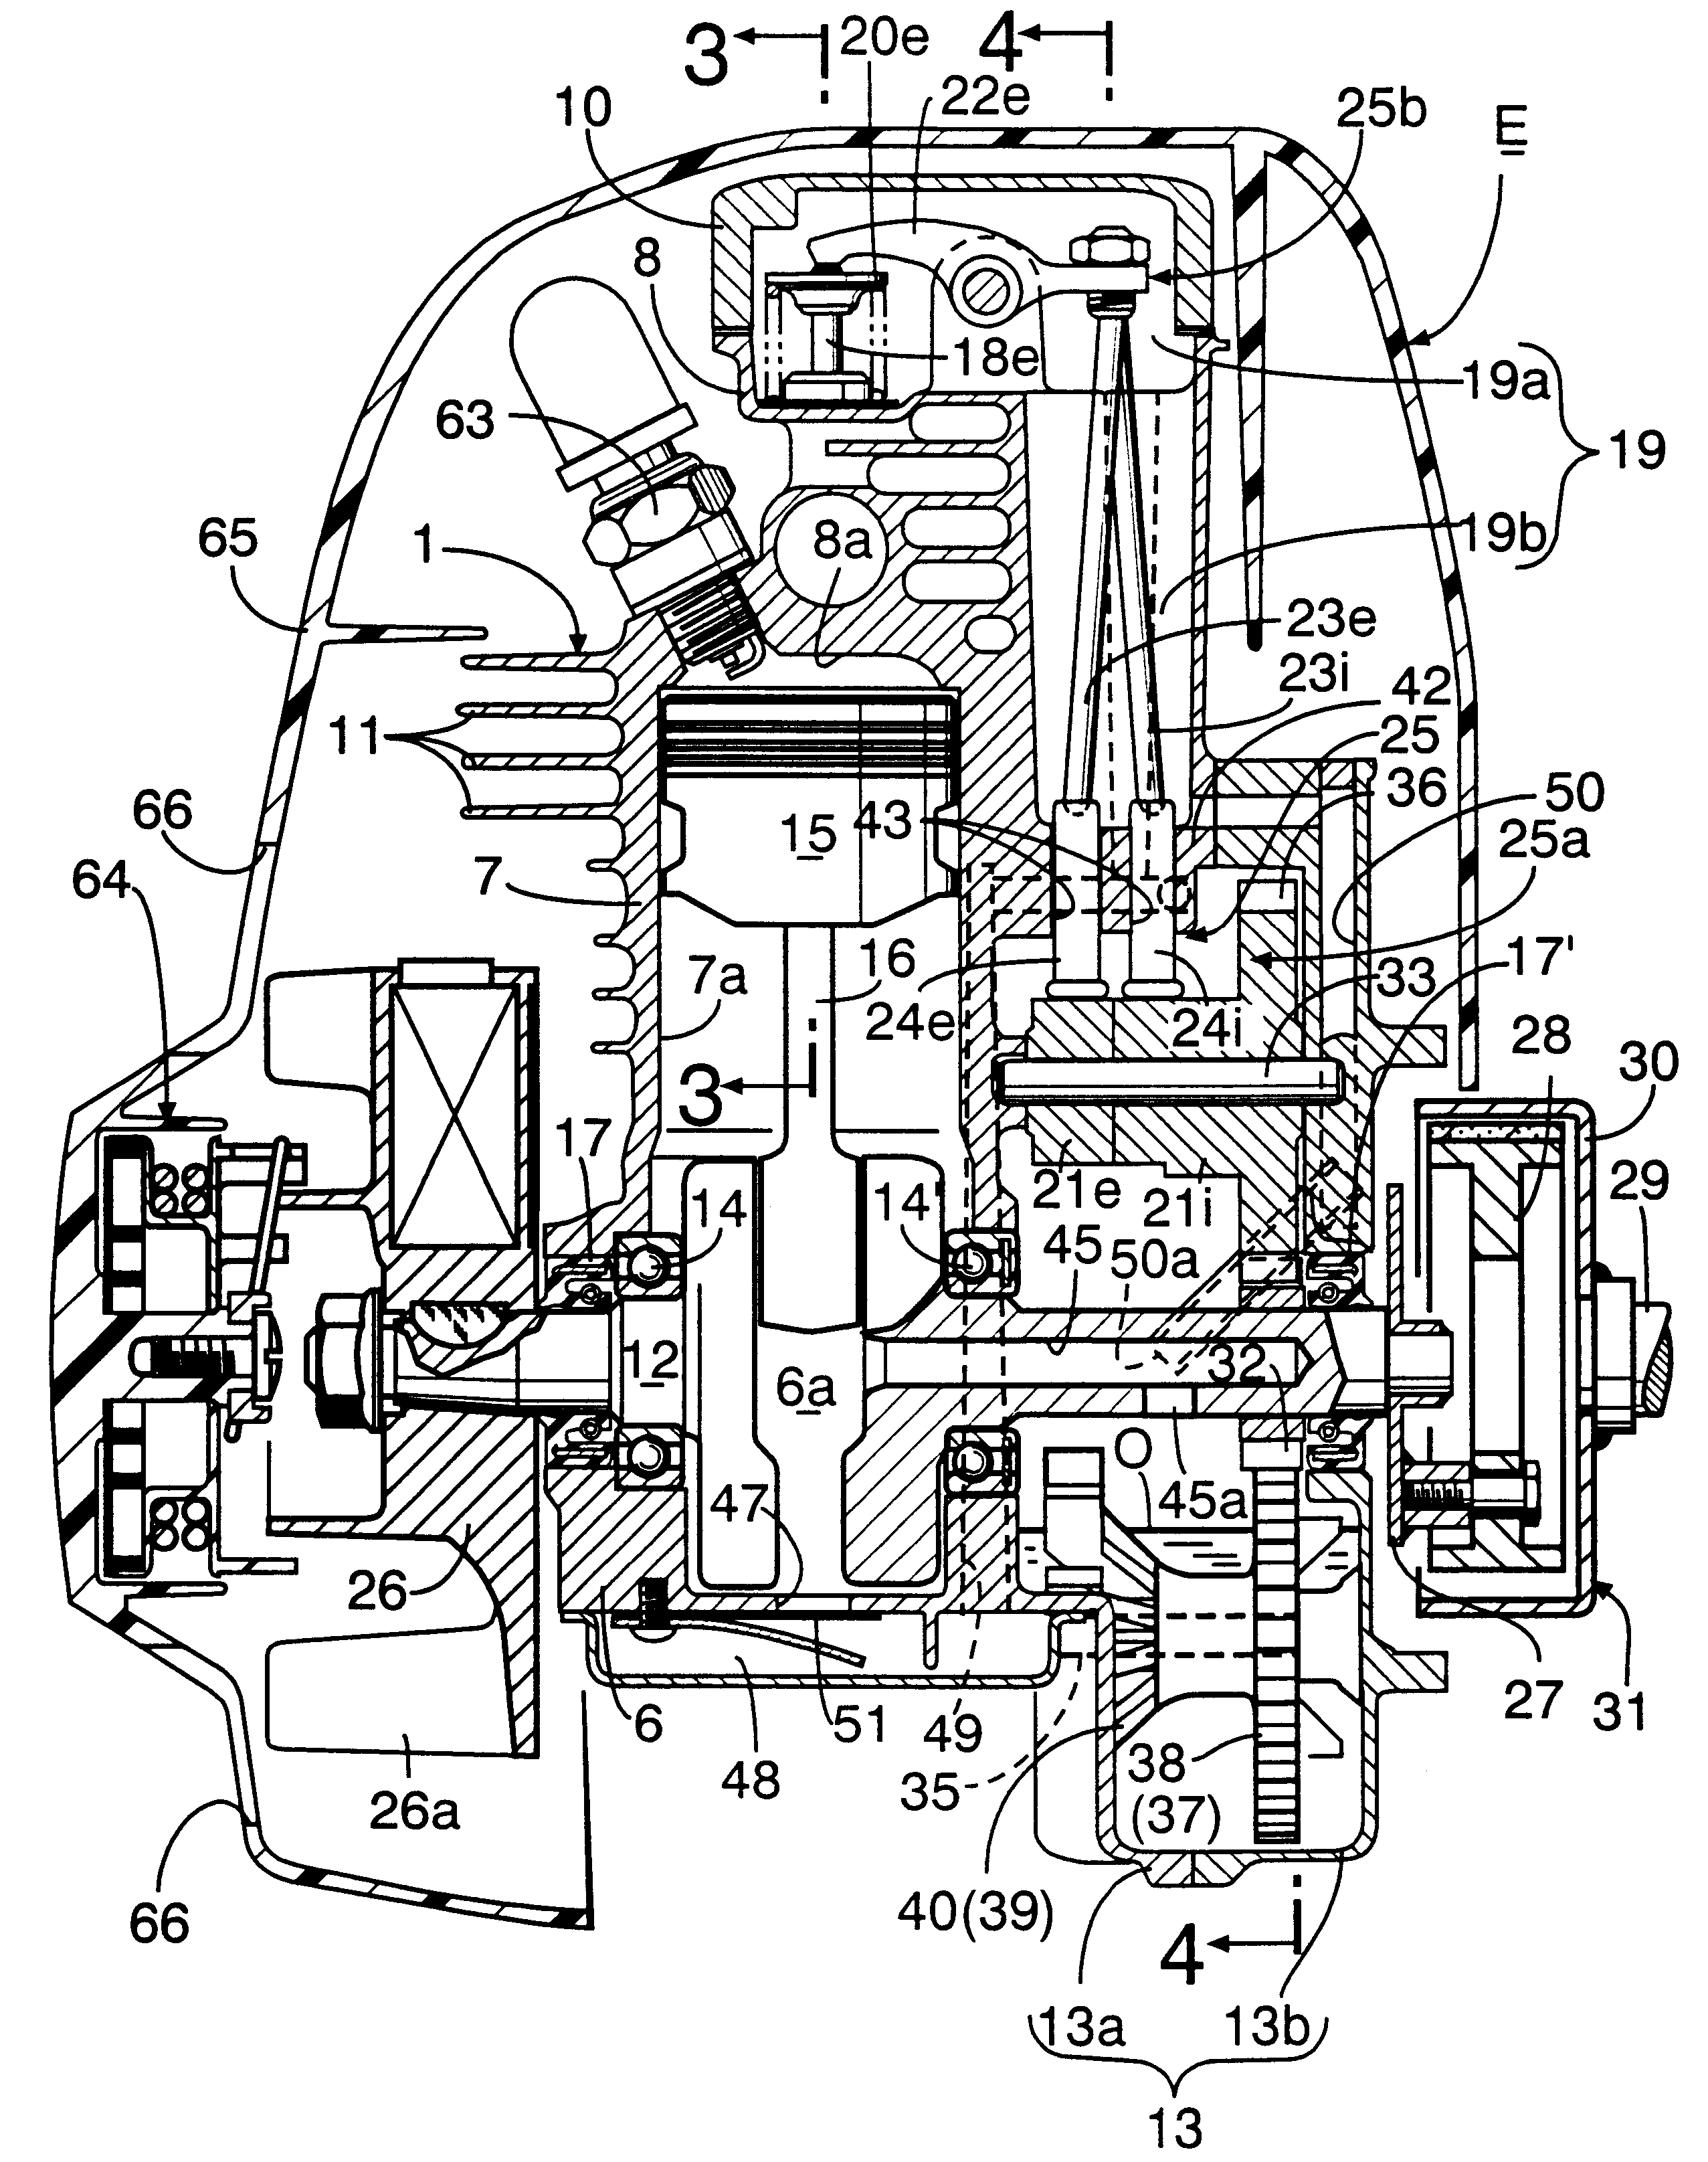 Handheld type four-cycle engine